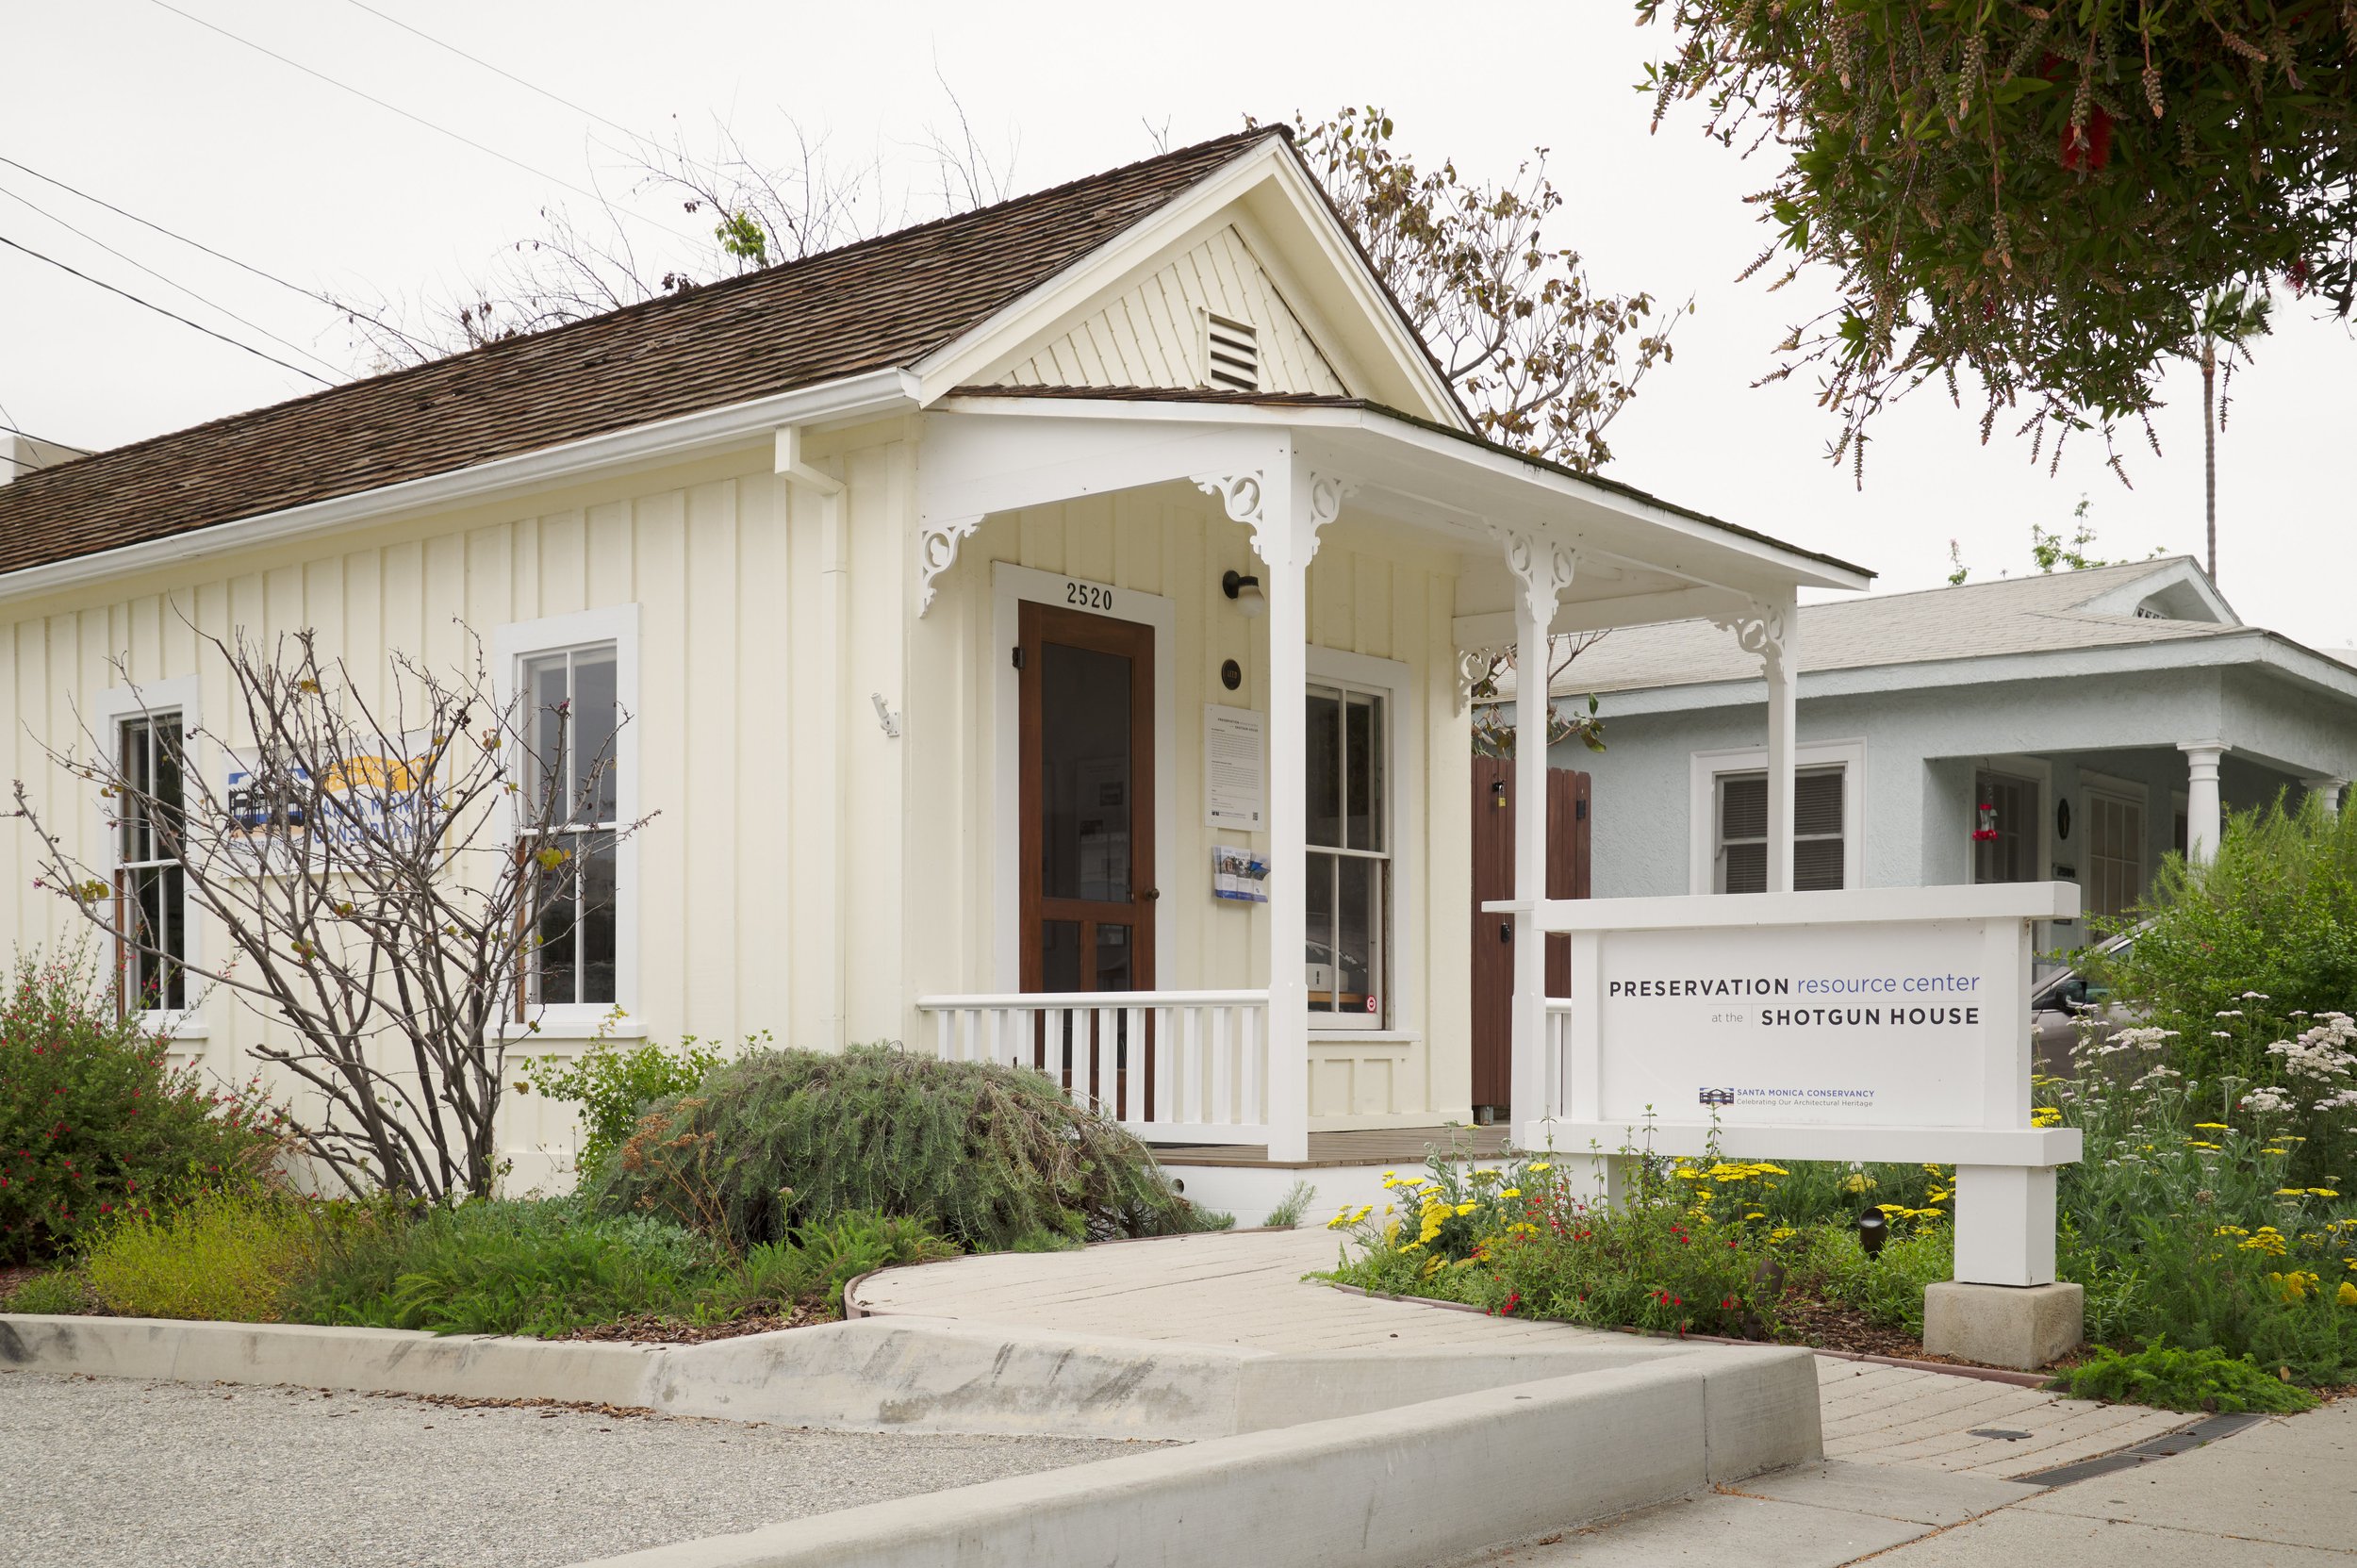  Sidewalk view of the Preservation Resource Center at the Shotgun House on Wednesday, April 12, 2023, in Santa Monica, Calif. (Nicholas McCall | The Corsair) 